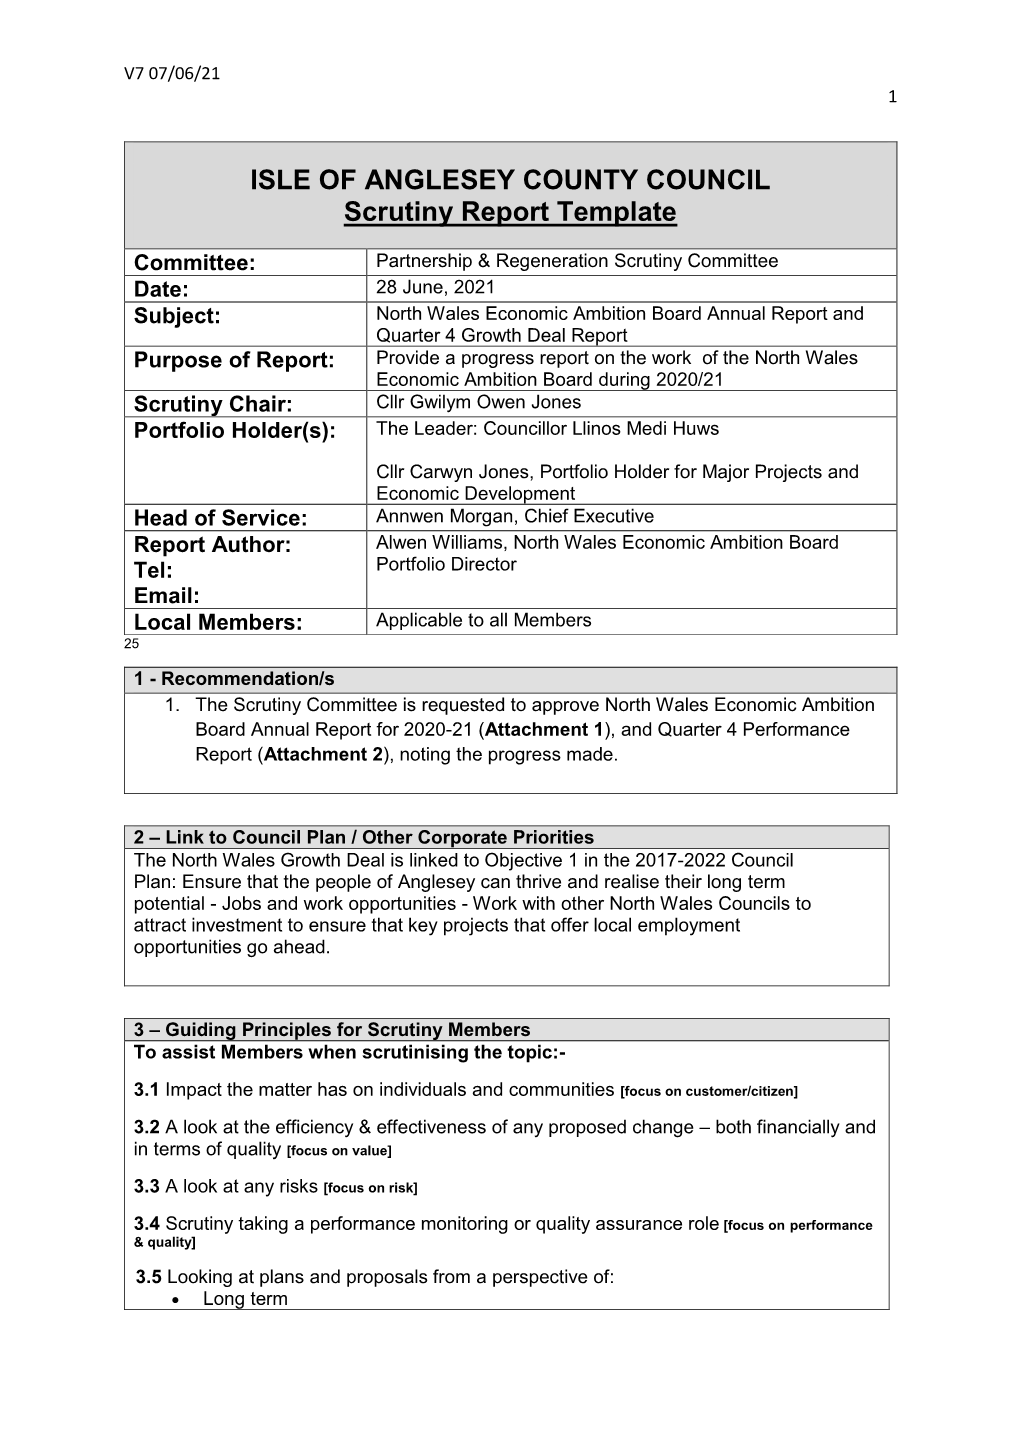 ISLE of ANGLESEY COUNTY COUNCIL Scrutiny Report Template